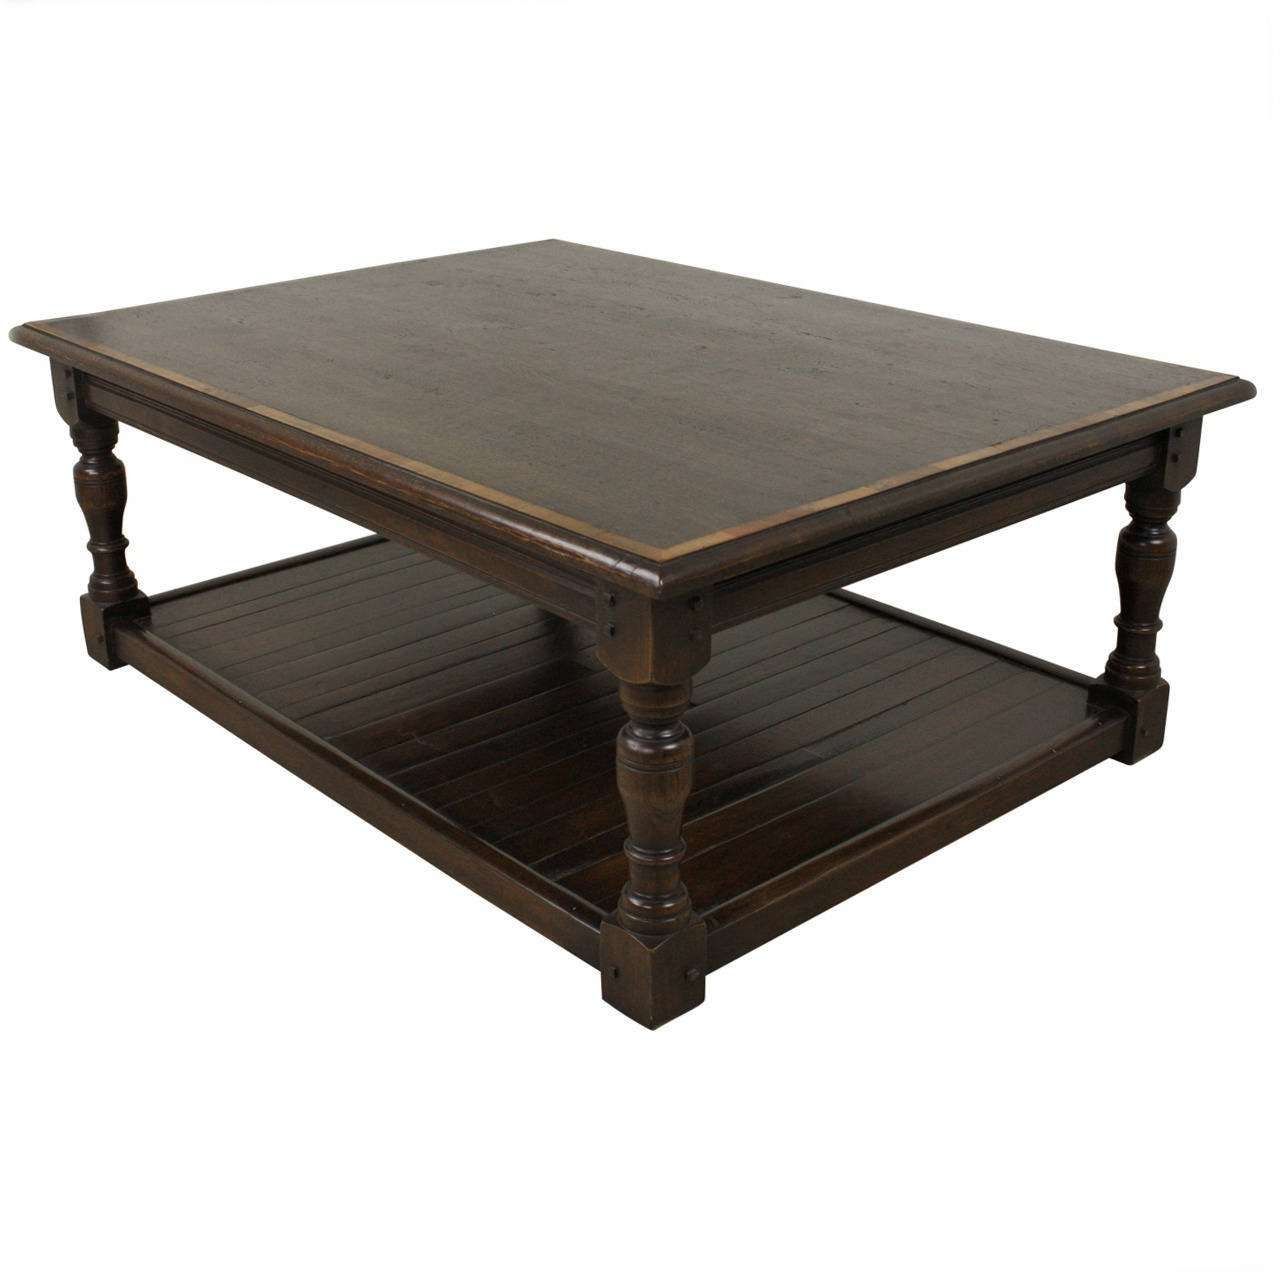 Dark Oak English Potboard Coffee Table For Sale At 1stdibs Within Well Liked Dark Coffee Tables (View 1 of 20)